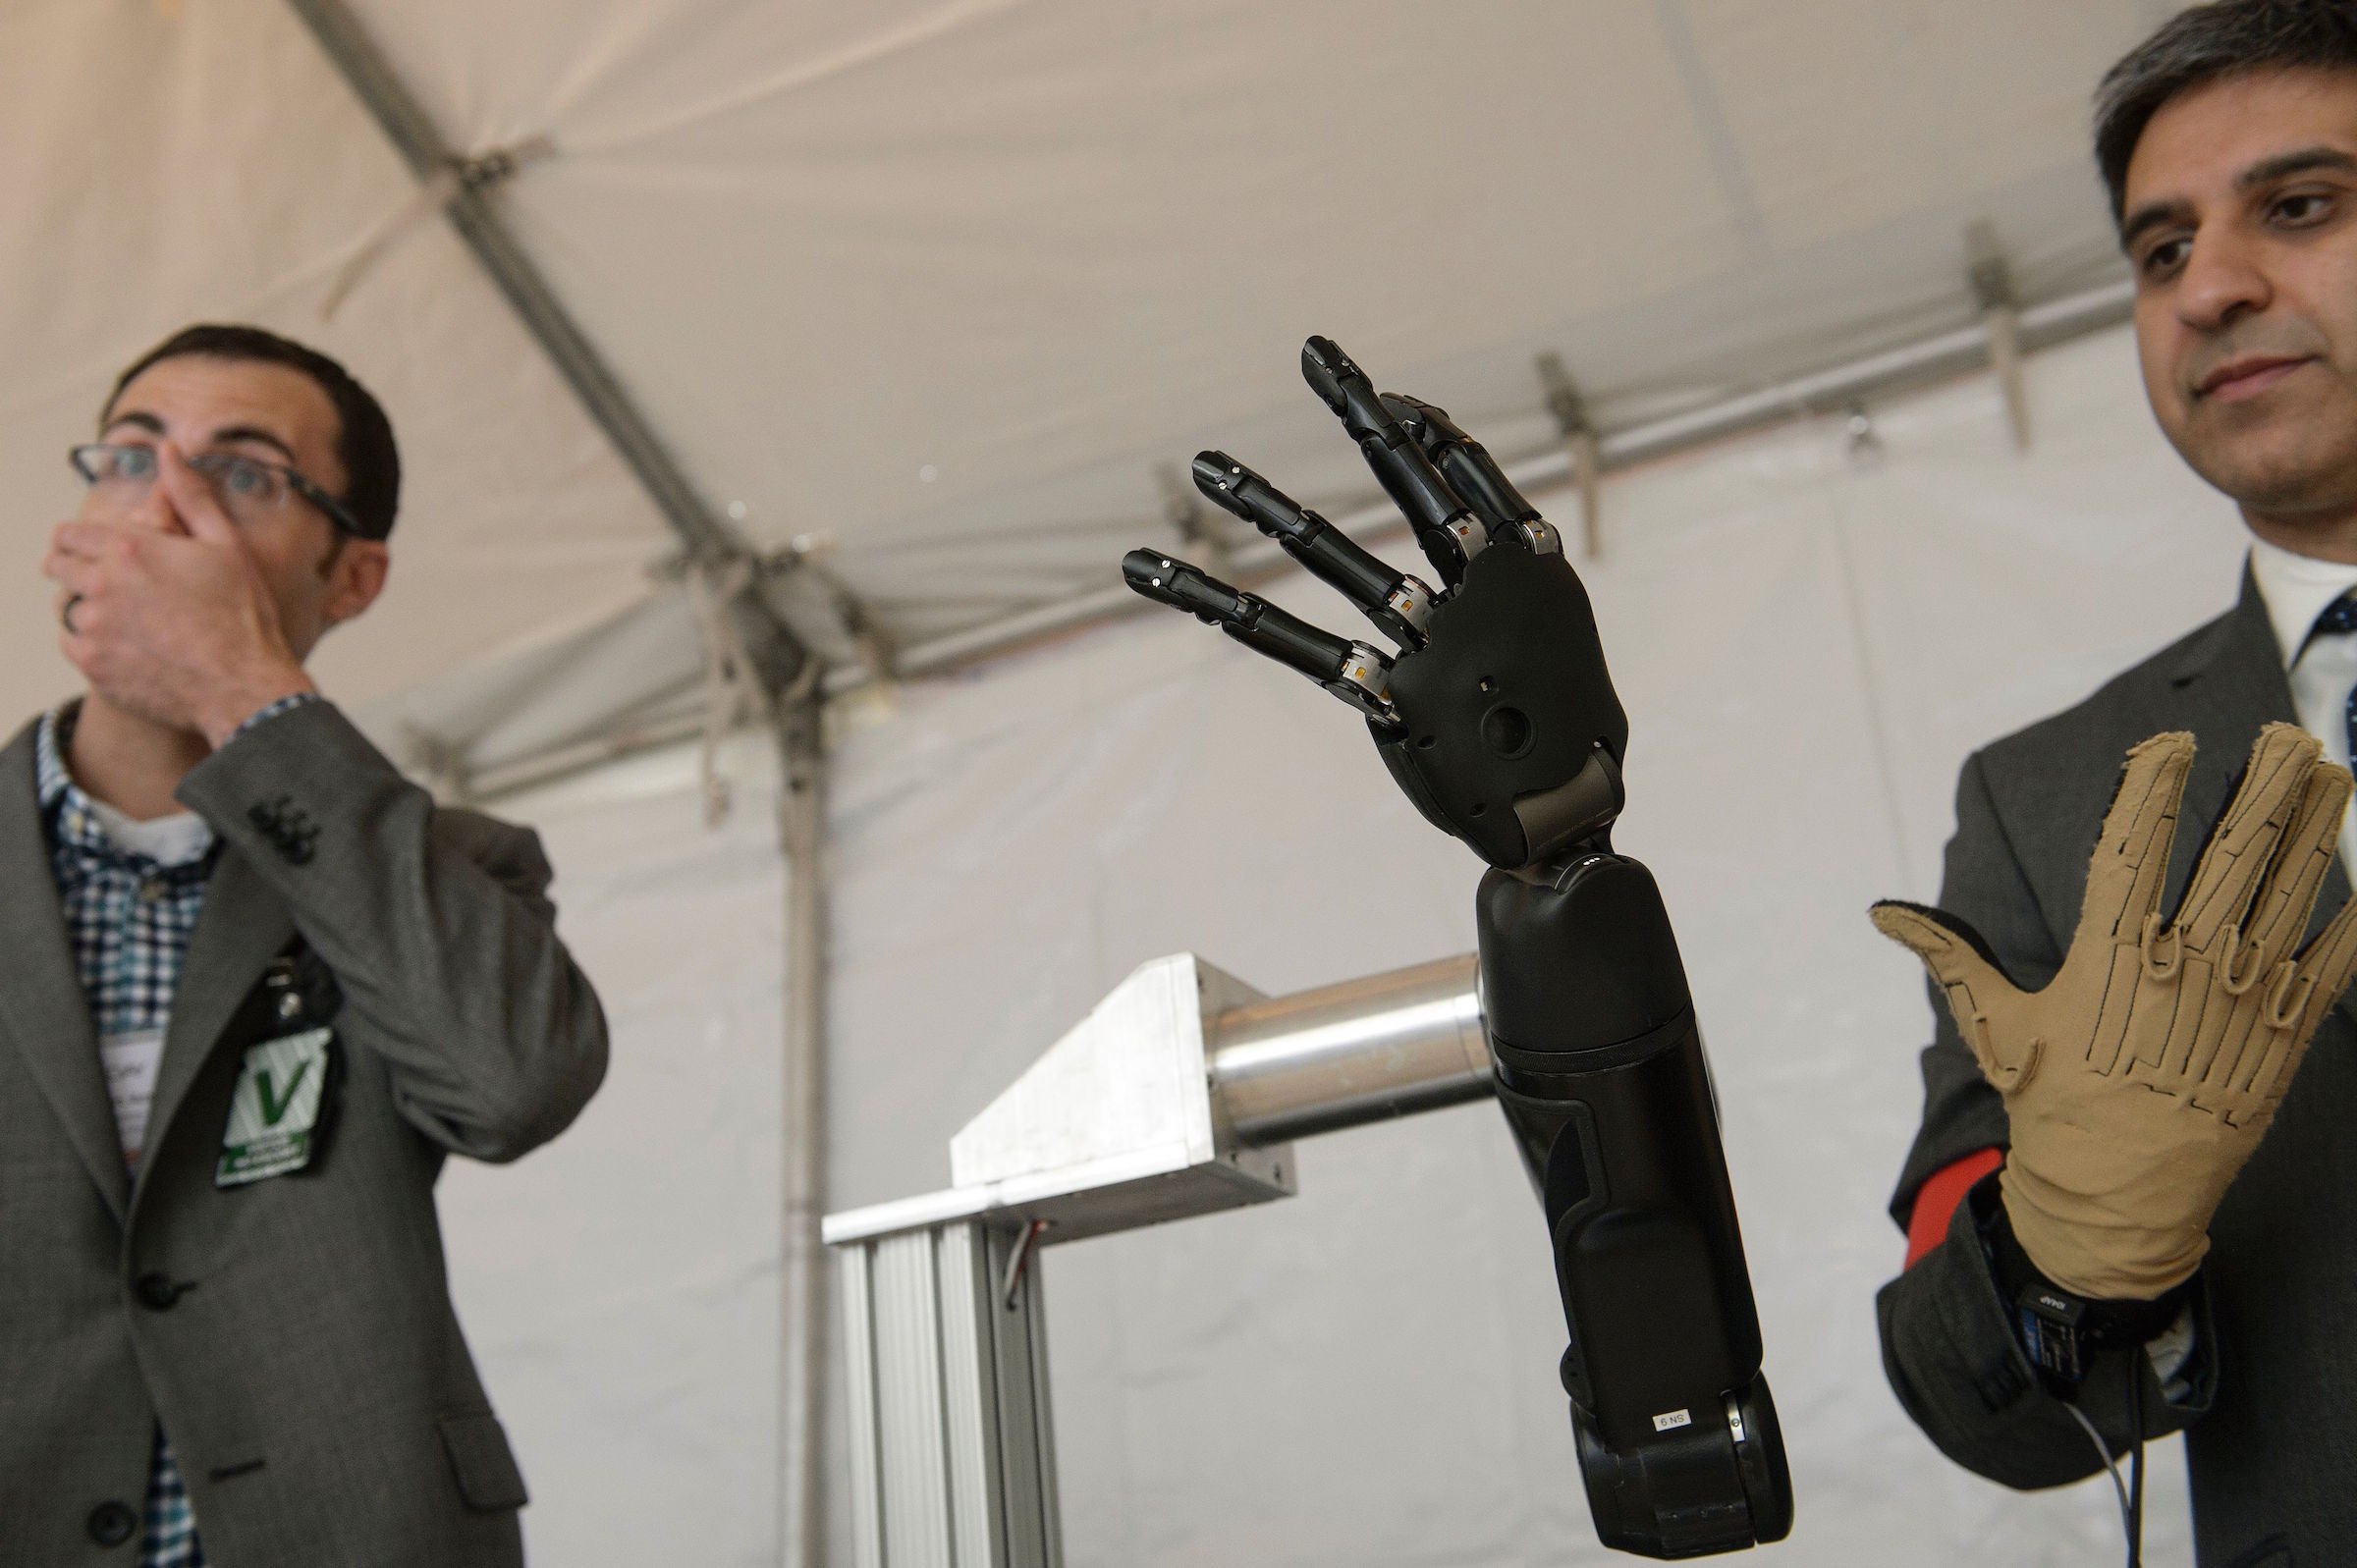 Exhibitors from Johns Hopkins Applied Physics Laboratory  stand with a robotic hand during the Defense Advanced Research Projects Agency (DARPA) Demo Day at The Pentagon on May 11, 2016 in Washington, DC. Darpa's continuing research into neurotechnology is currently prompting ethical questions about its potential military applications. (Photo by BRENDAN SMIALOWSKI/AFP/Getty Images)